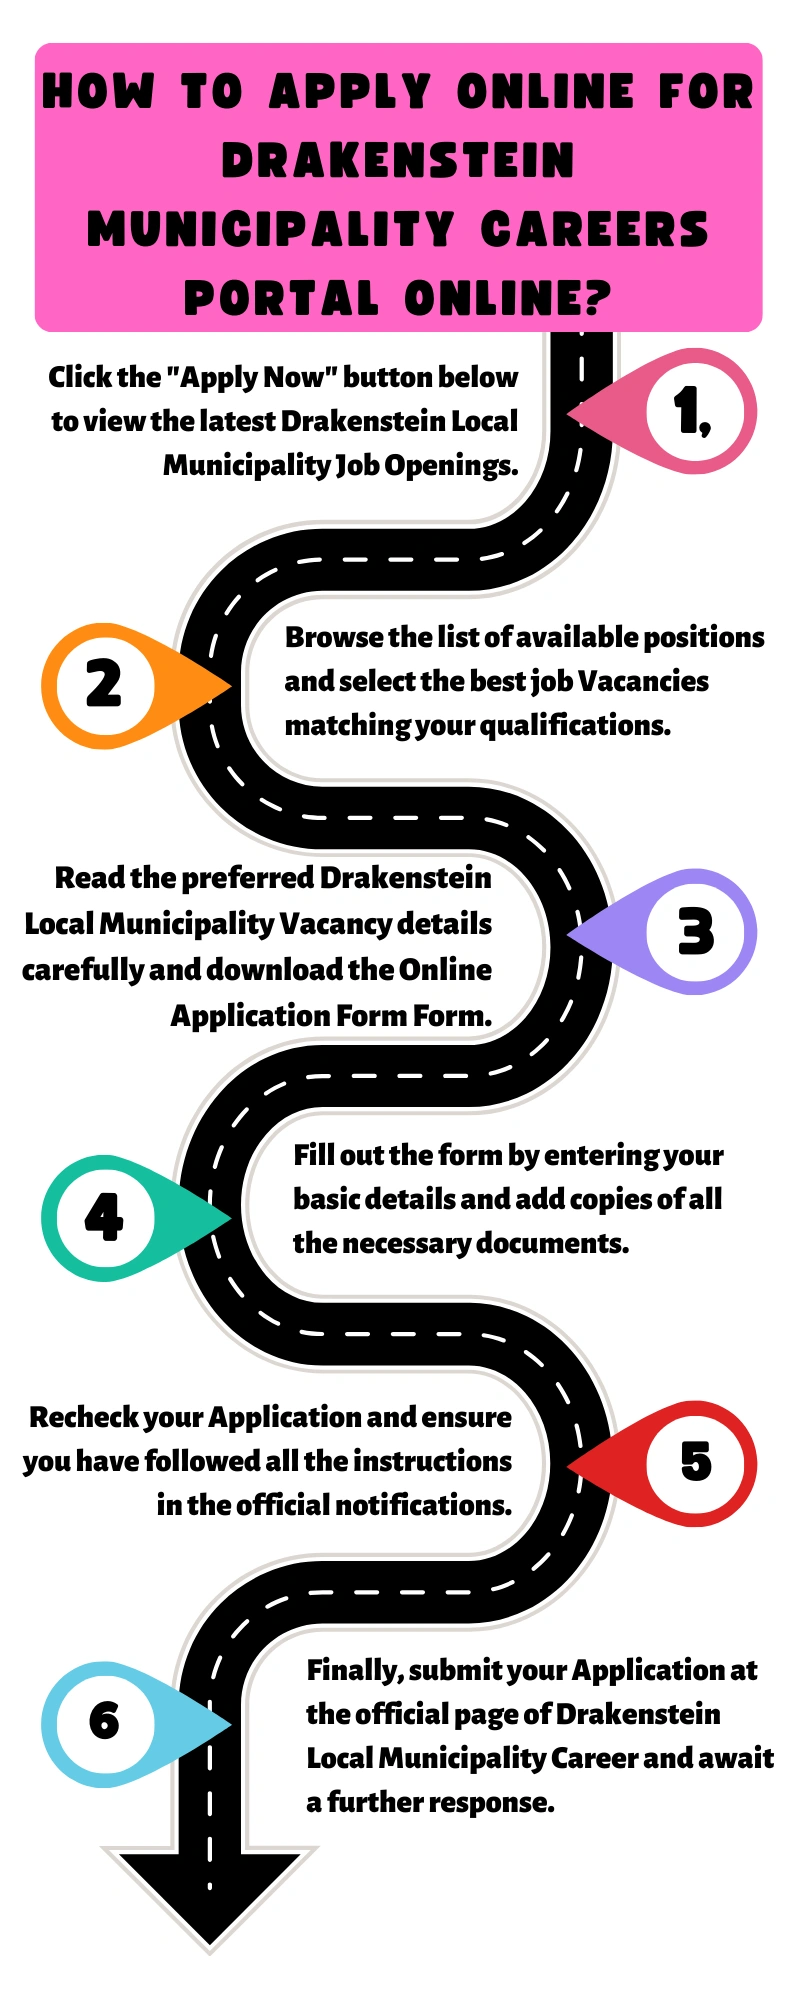 How to Apply online for Drakenstein Municipality Careers Portal Online?